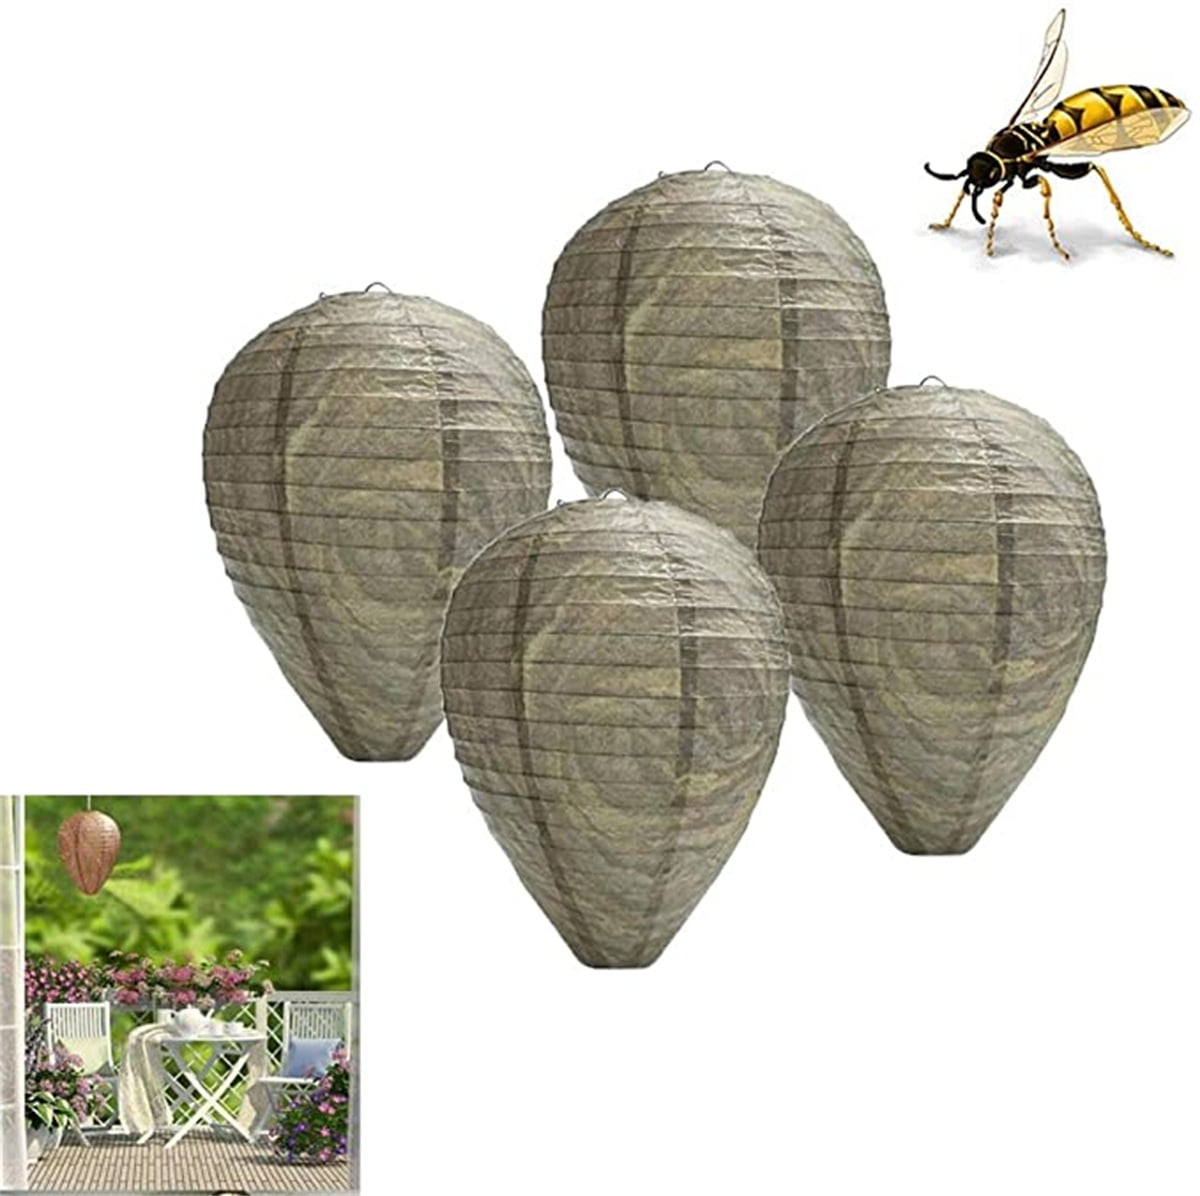 Wasp Nest Decoy-2Pcs Upgraded Waterproof Hanging Wasp Repellent,Natual Effective Paper Hanging Fake Wasp Nest Bee,Wasp & Hornet Control for Home and Garden Outdoors Eco Friendly 